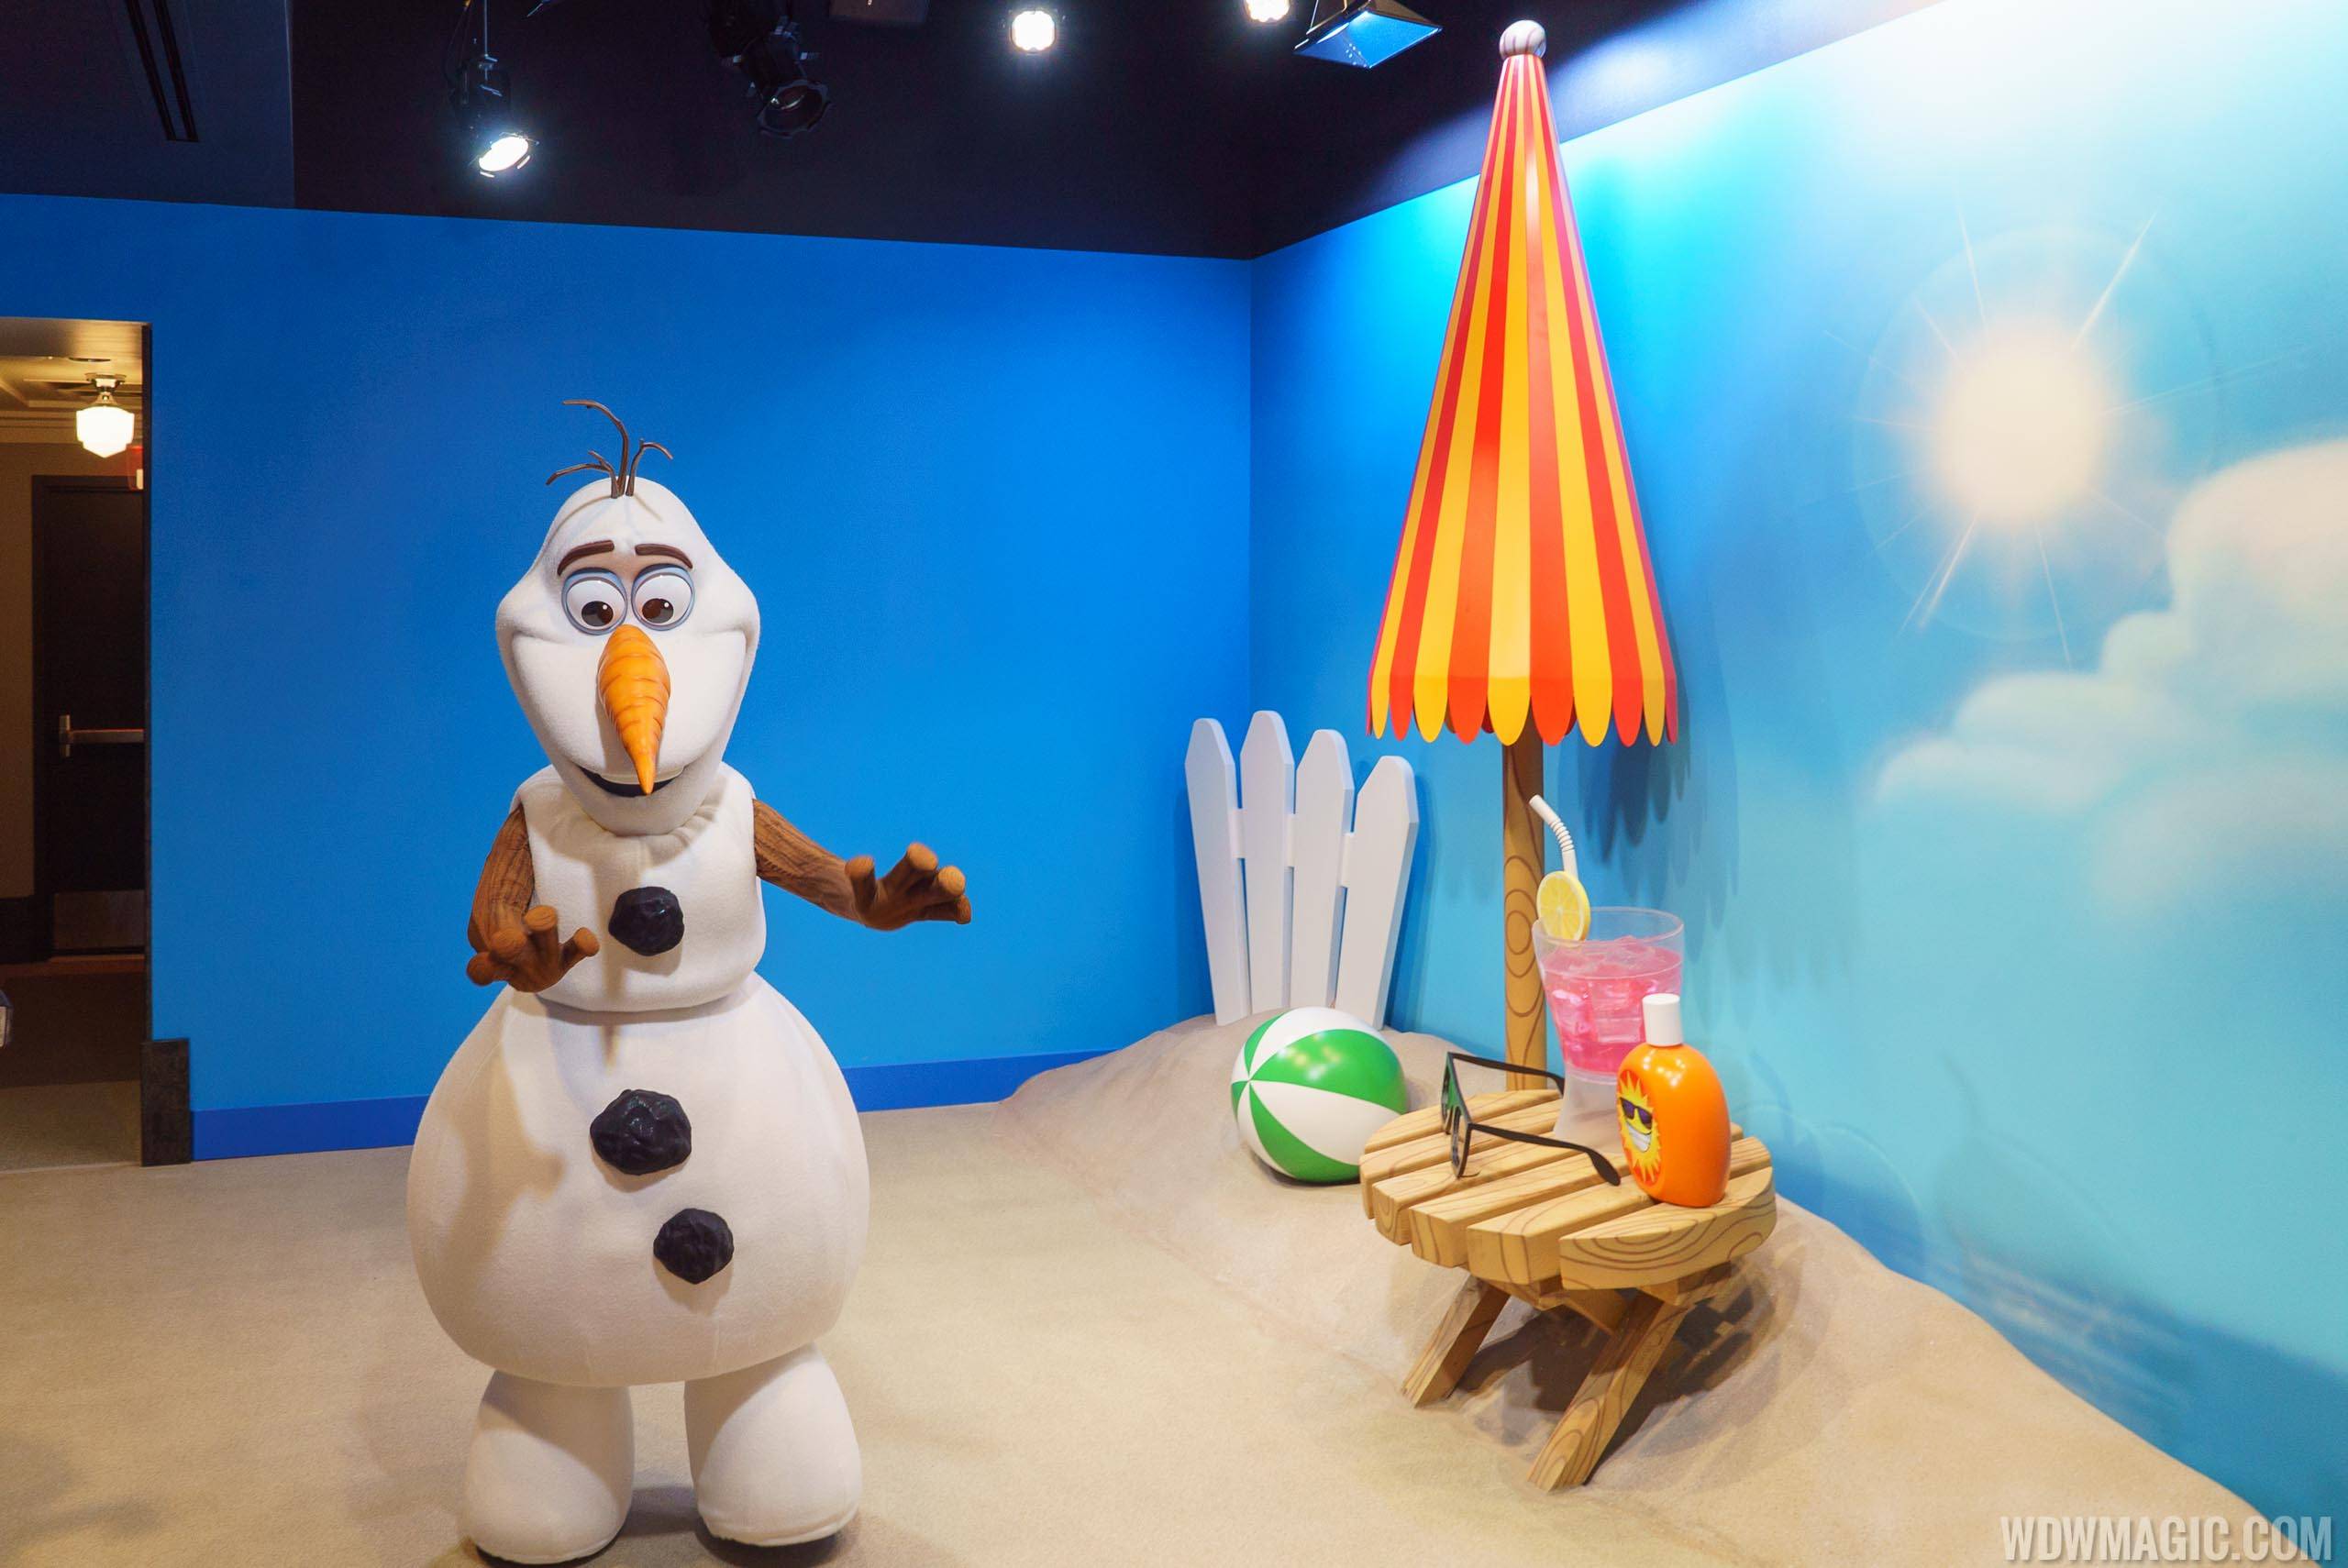 Celebrity Spotlight with Olaf to reopen at Disney's Hollywood Studios